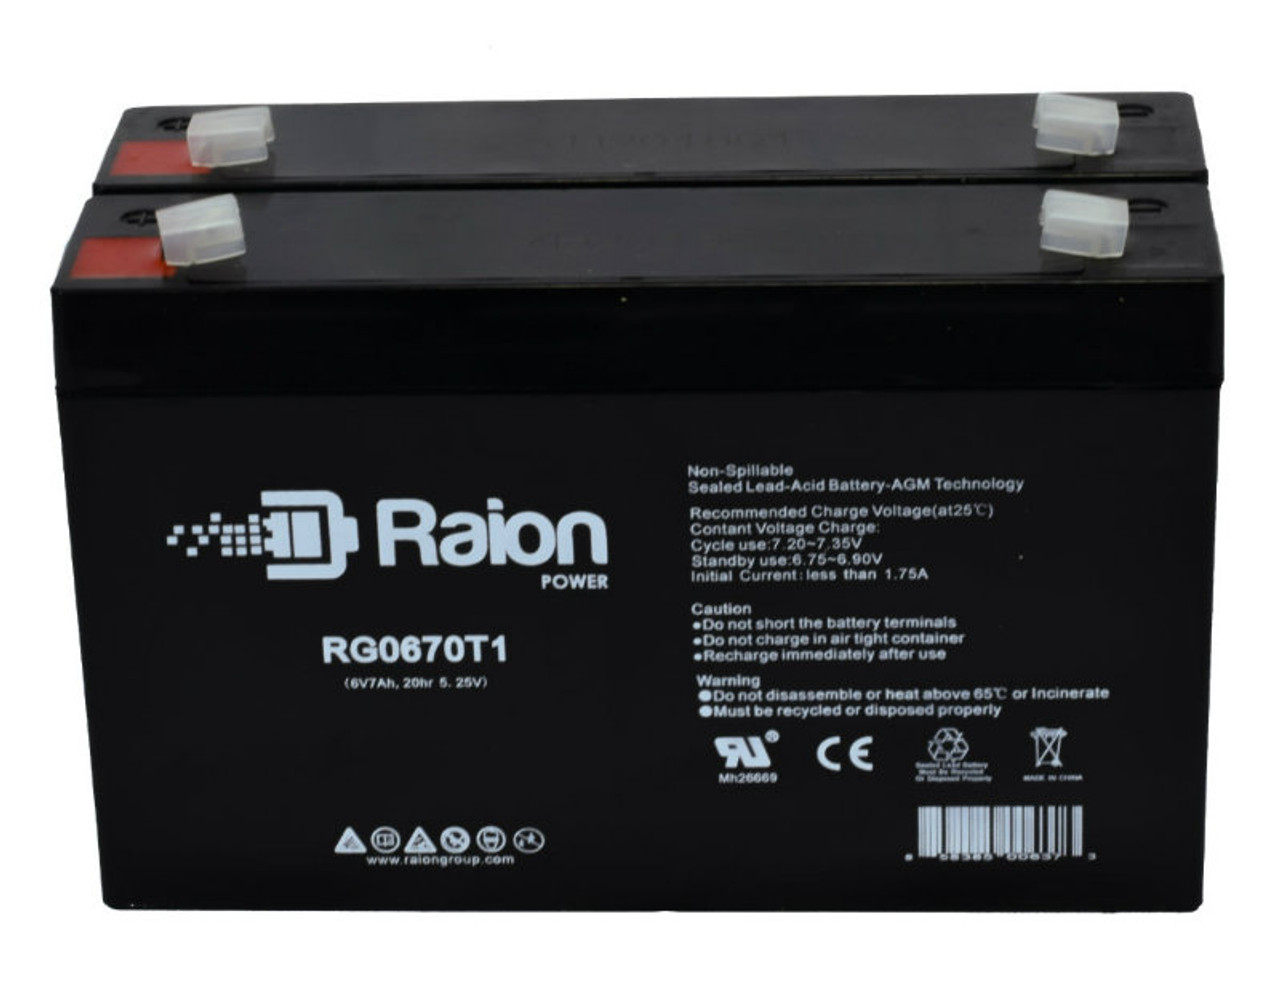 Raion Power RG0670T1 6V 7Ah Replacement Emergency Light Battery for Power-Sonic PS-665 - 2 Pack